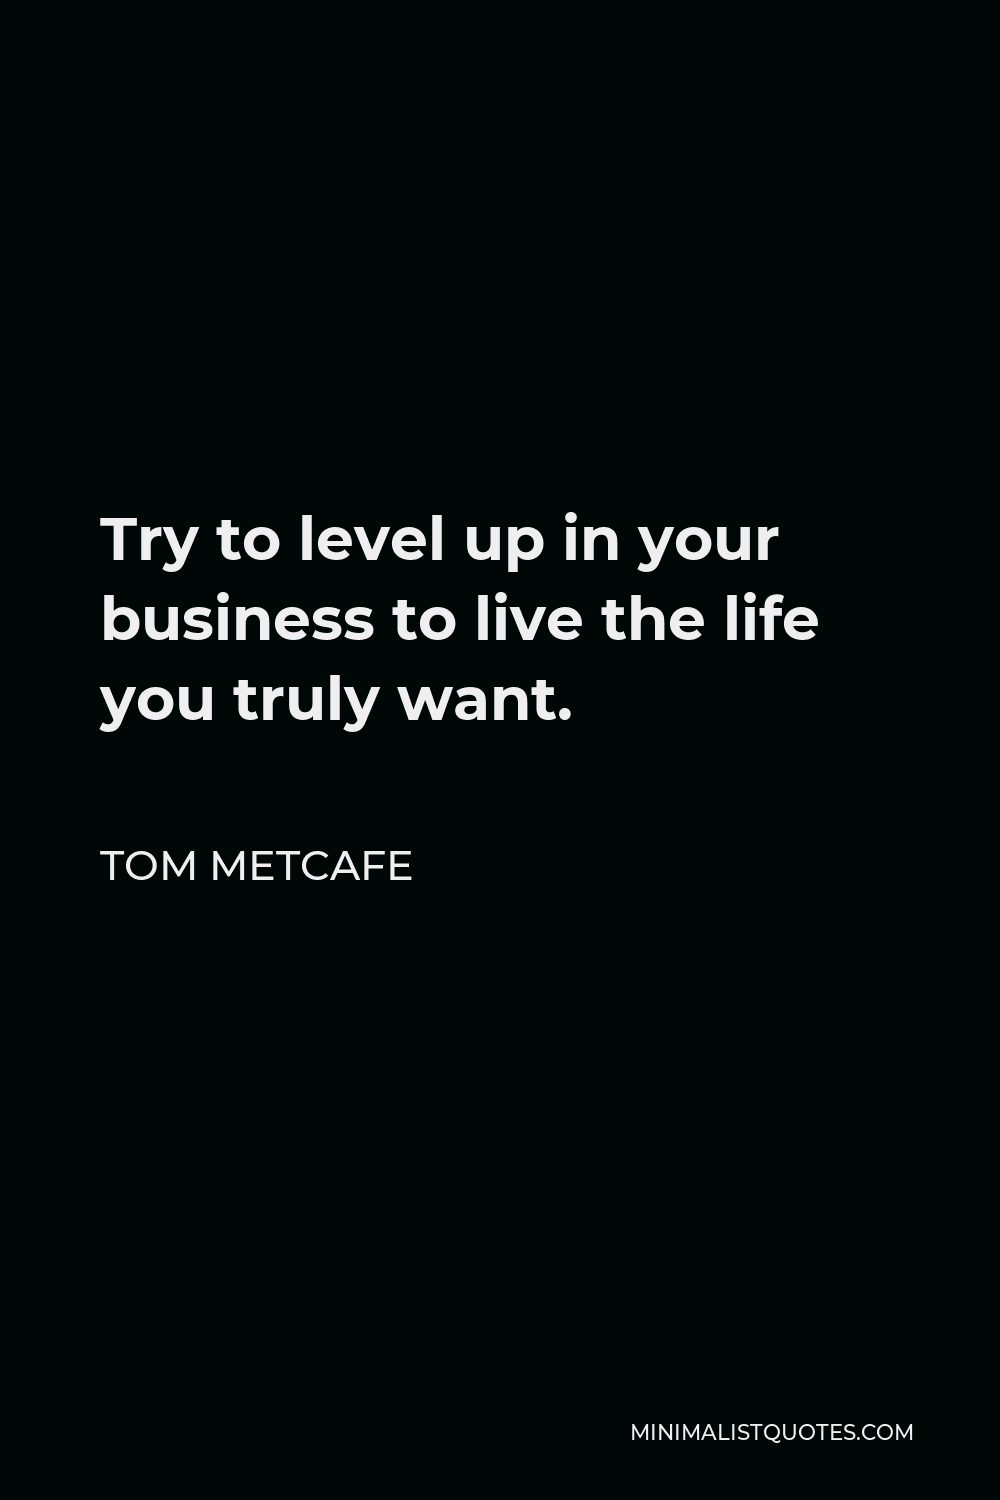 Tom Metcafe Quote - Try to level up in your business to live the life you truly want.